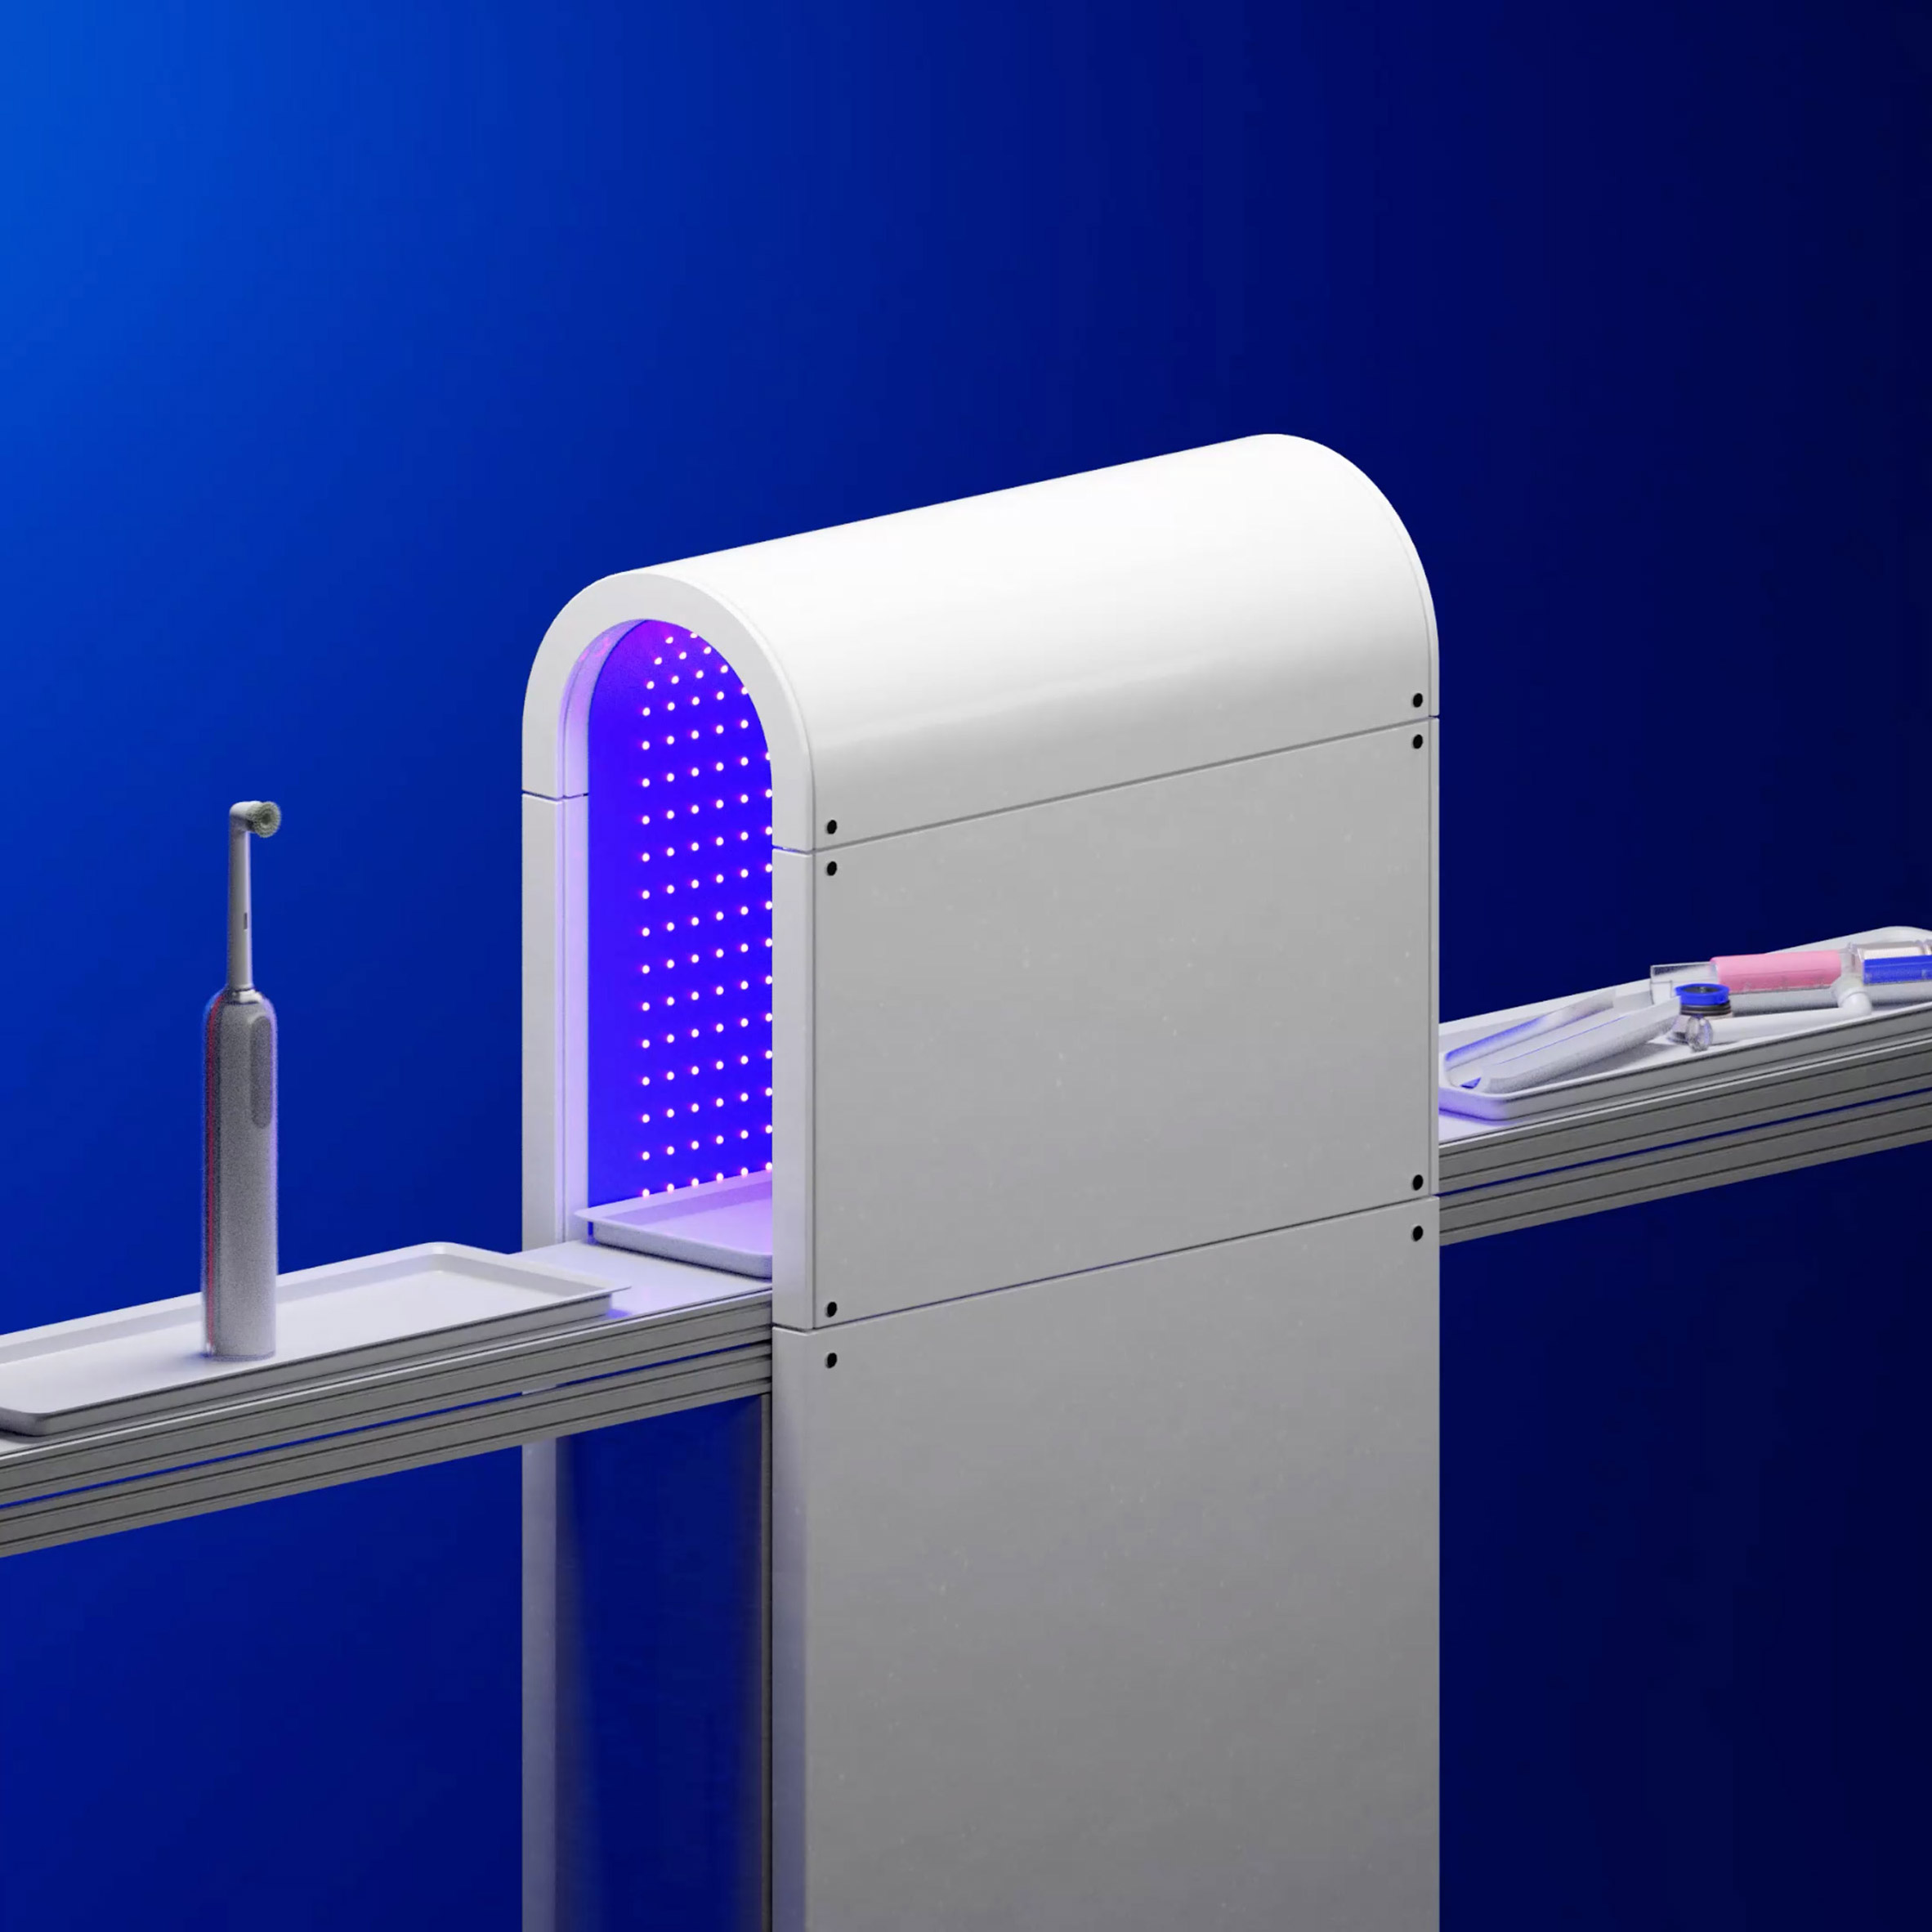 3D graphic showing a conveyer belt of electric toothbrushes going into a purple-lit tunnel and emerging on the other side in pieces